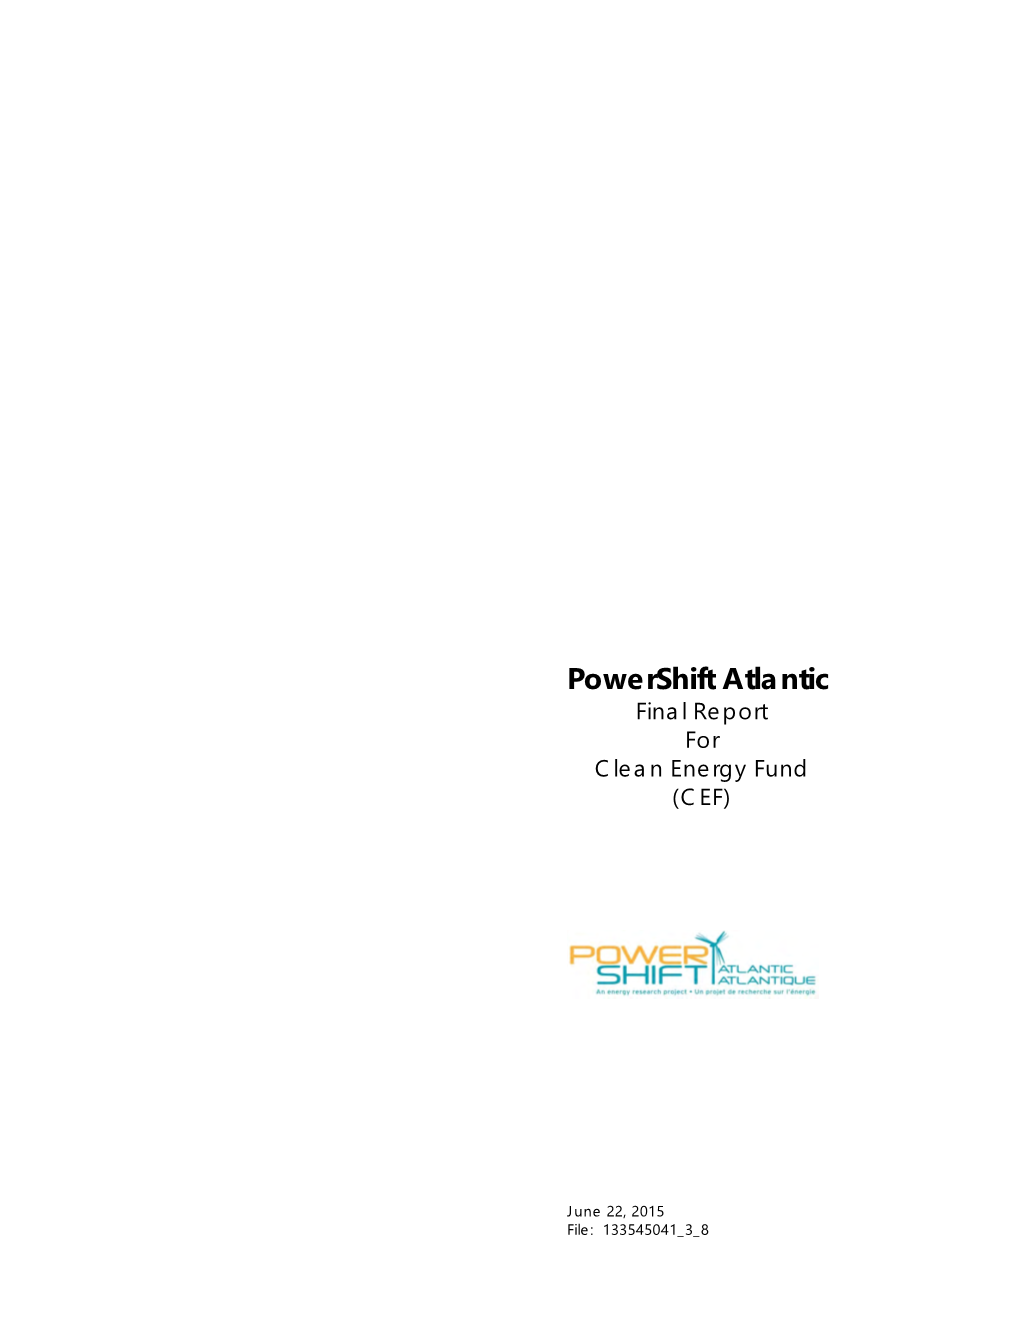 Powershift Atlantic Final Report for Clean Energy Fund (CEF)